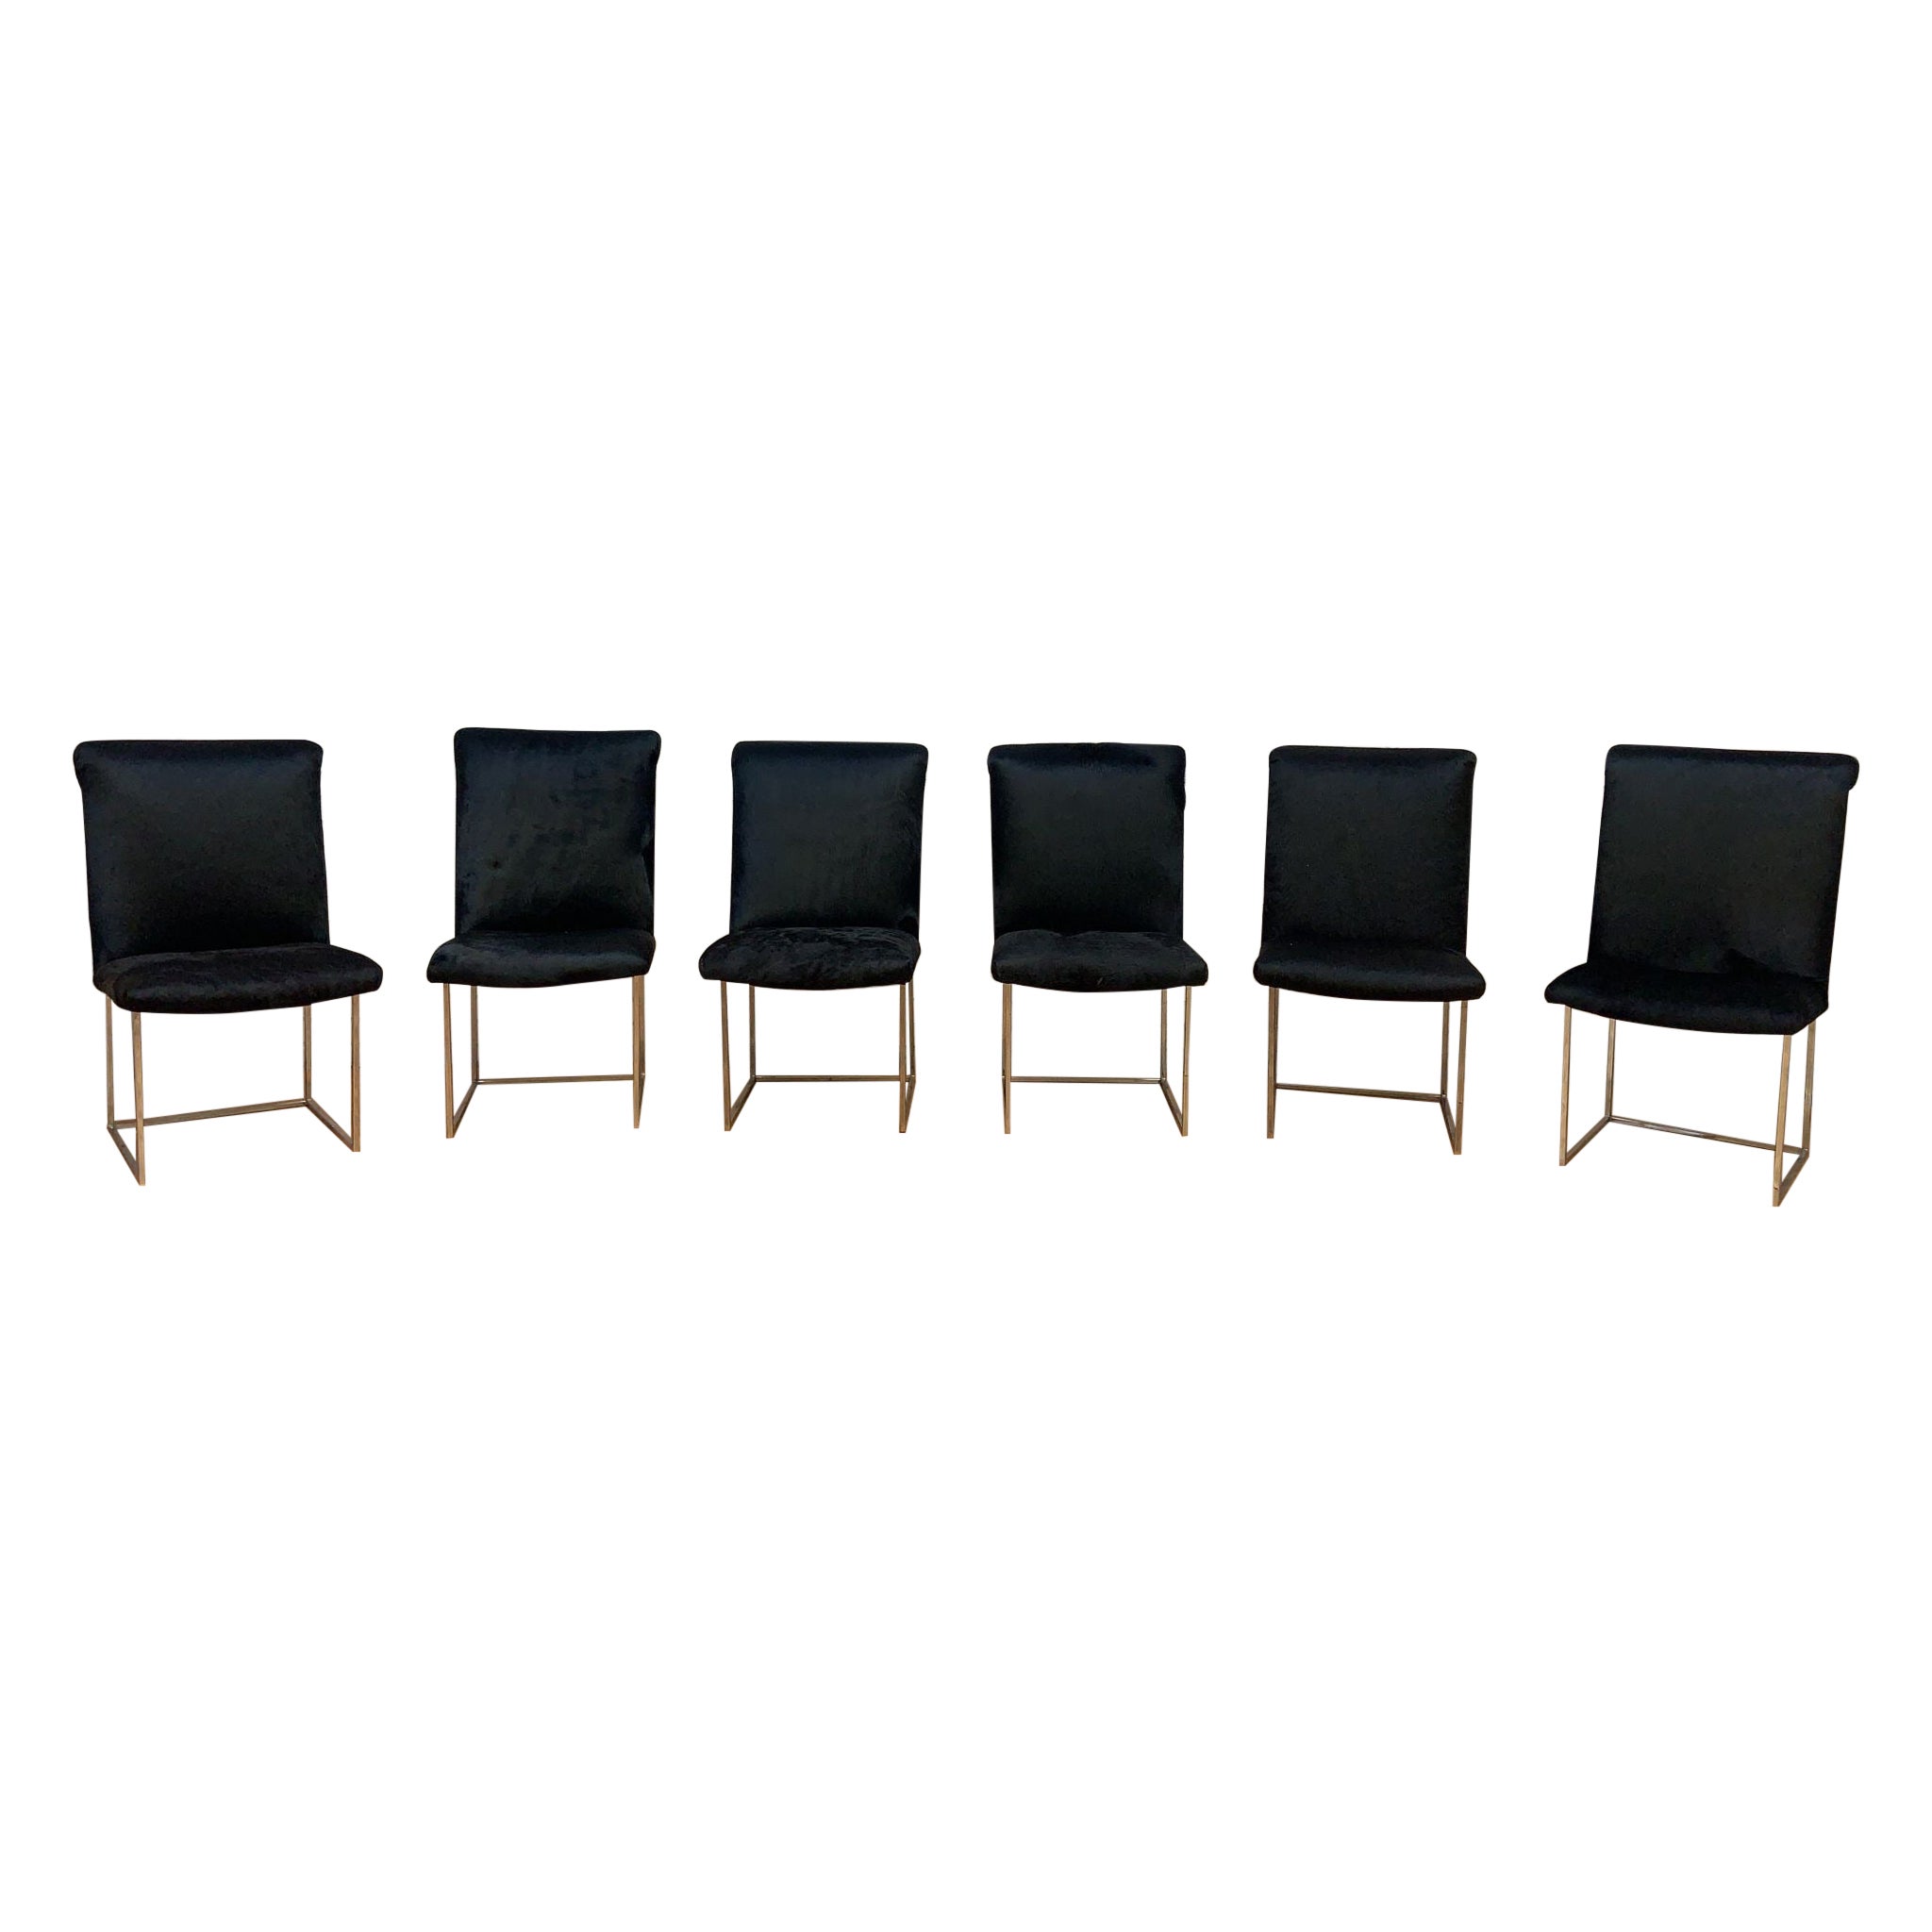 Milo Baughman for Thayer Coggin High Dining Chairs Newly Upholstered - Set of 6 For Sale